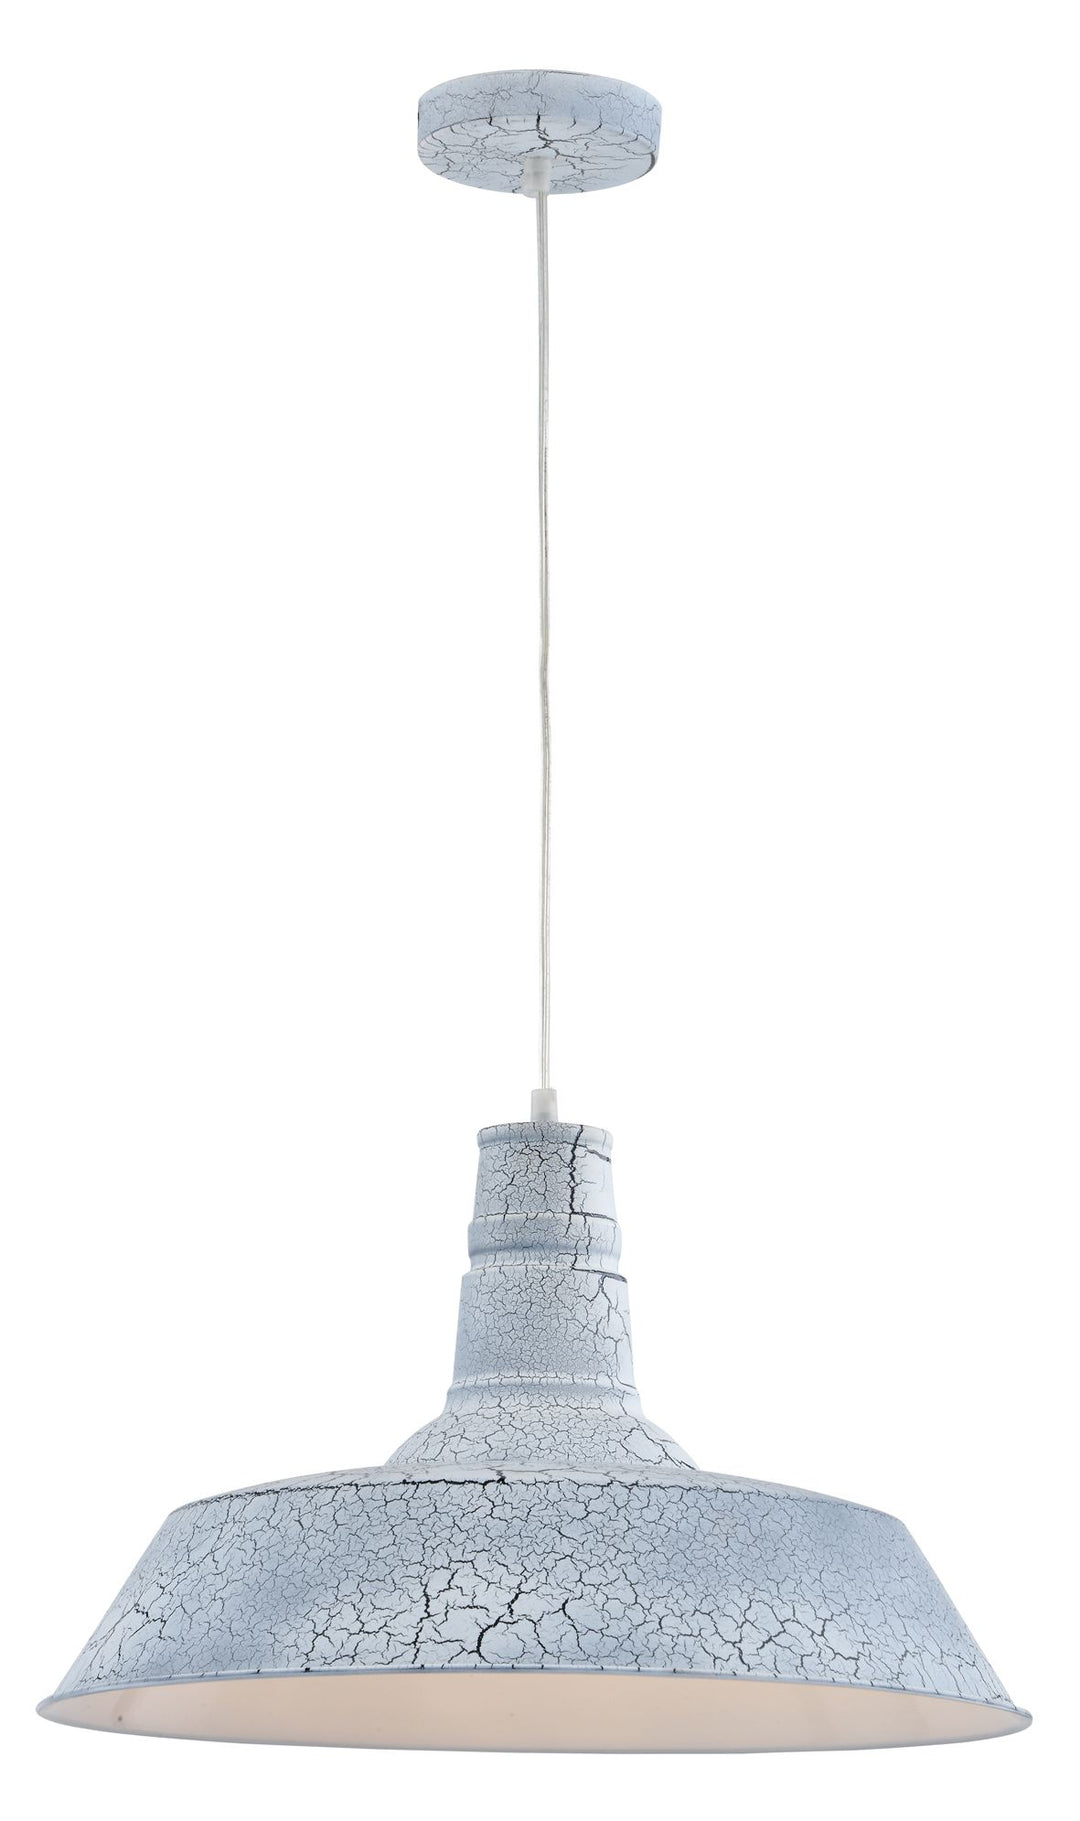 Industrial Funnel Pendant Lamp - Special Edition D